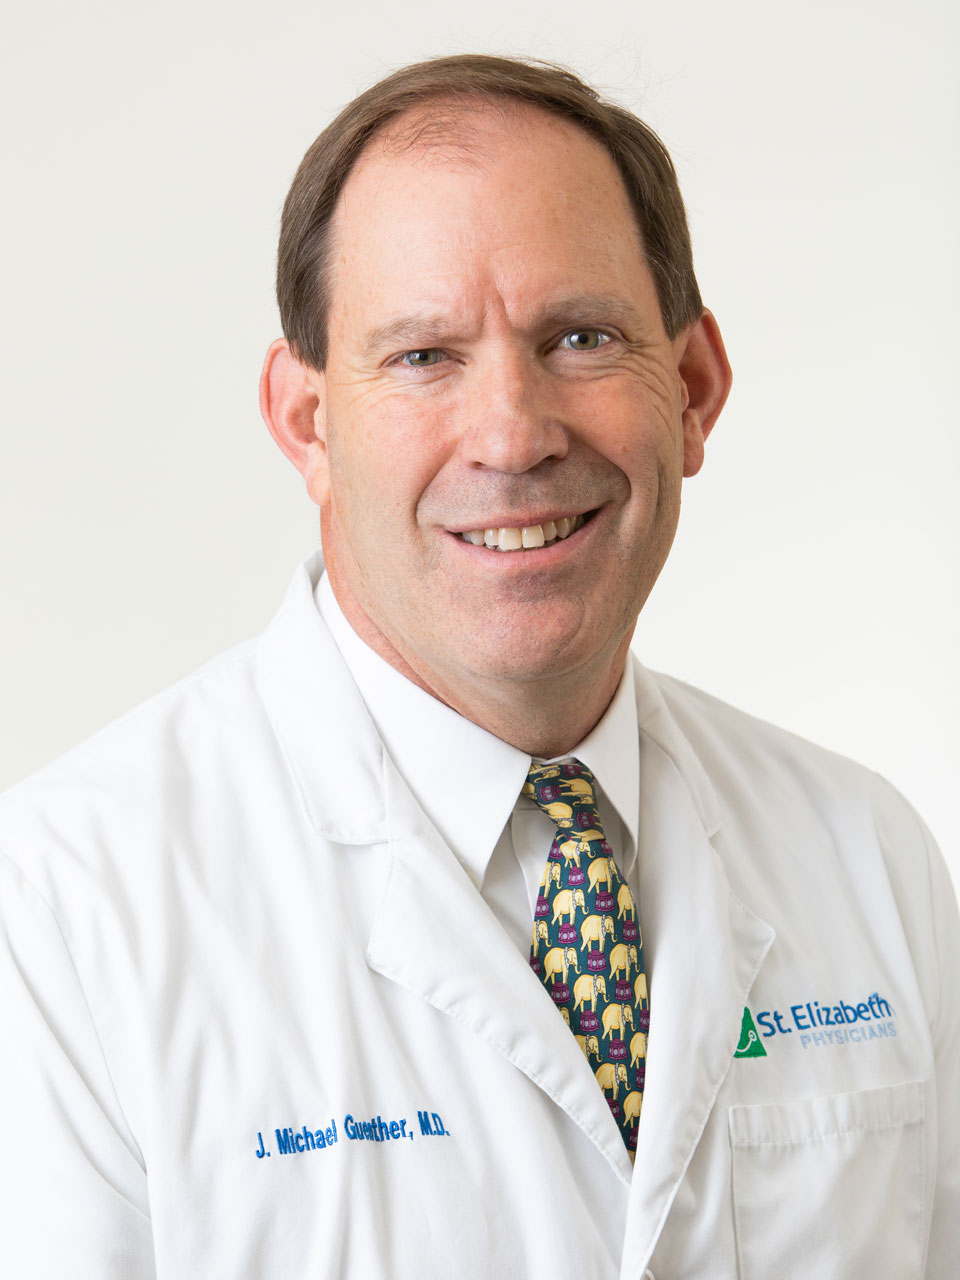 J. Michael Guenther, MD